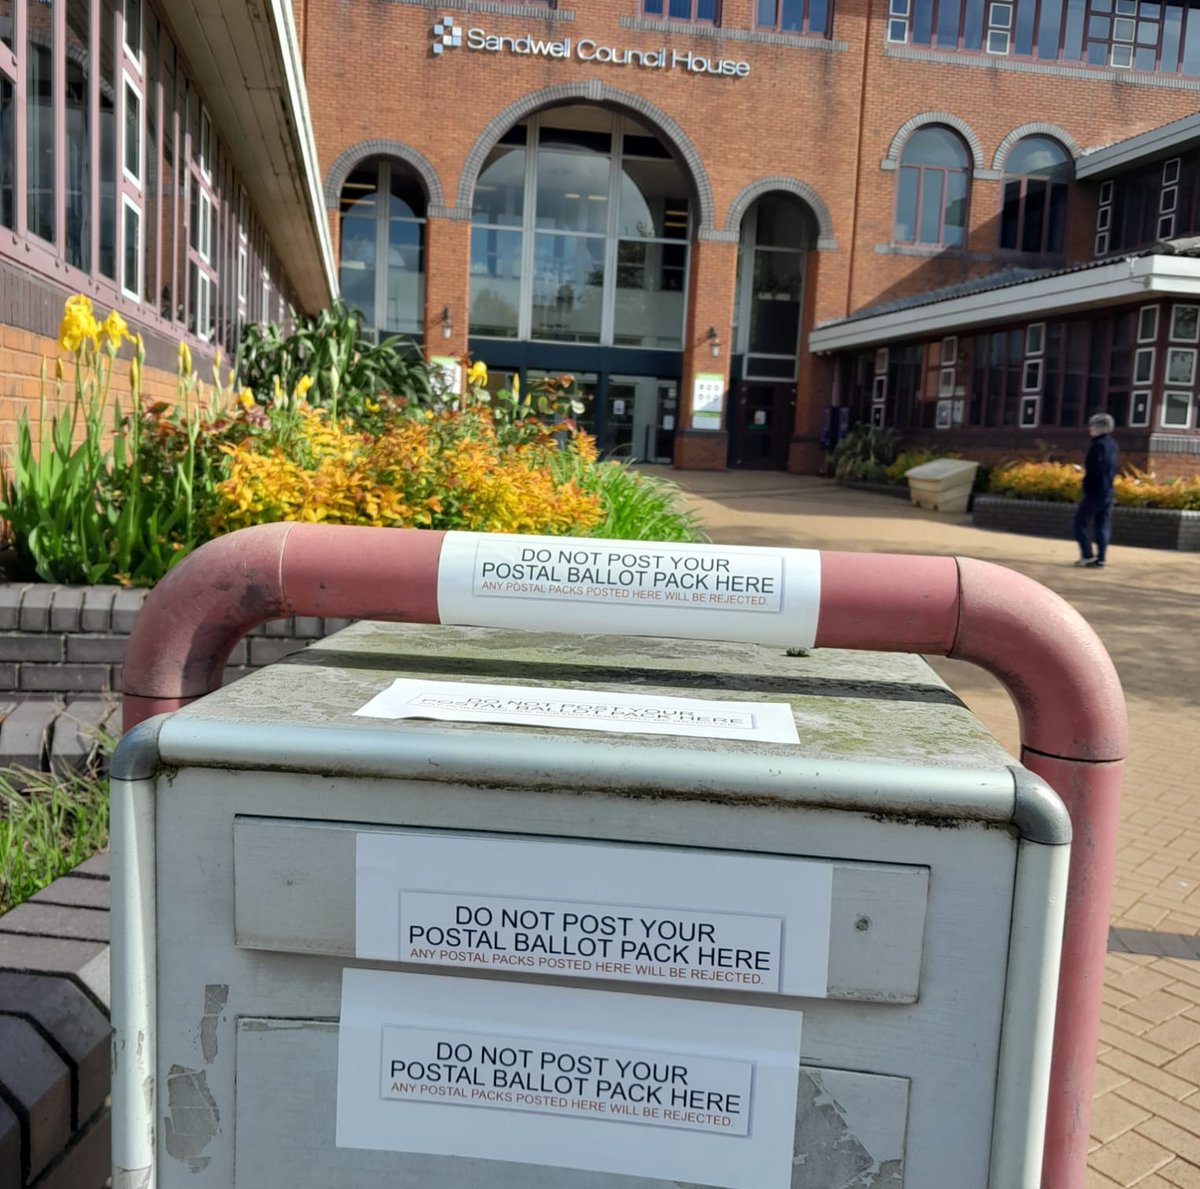 Don't try and post Postal Votes at the Council House.